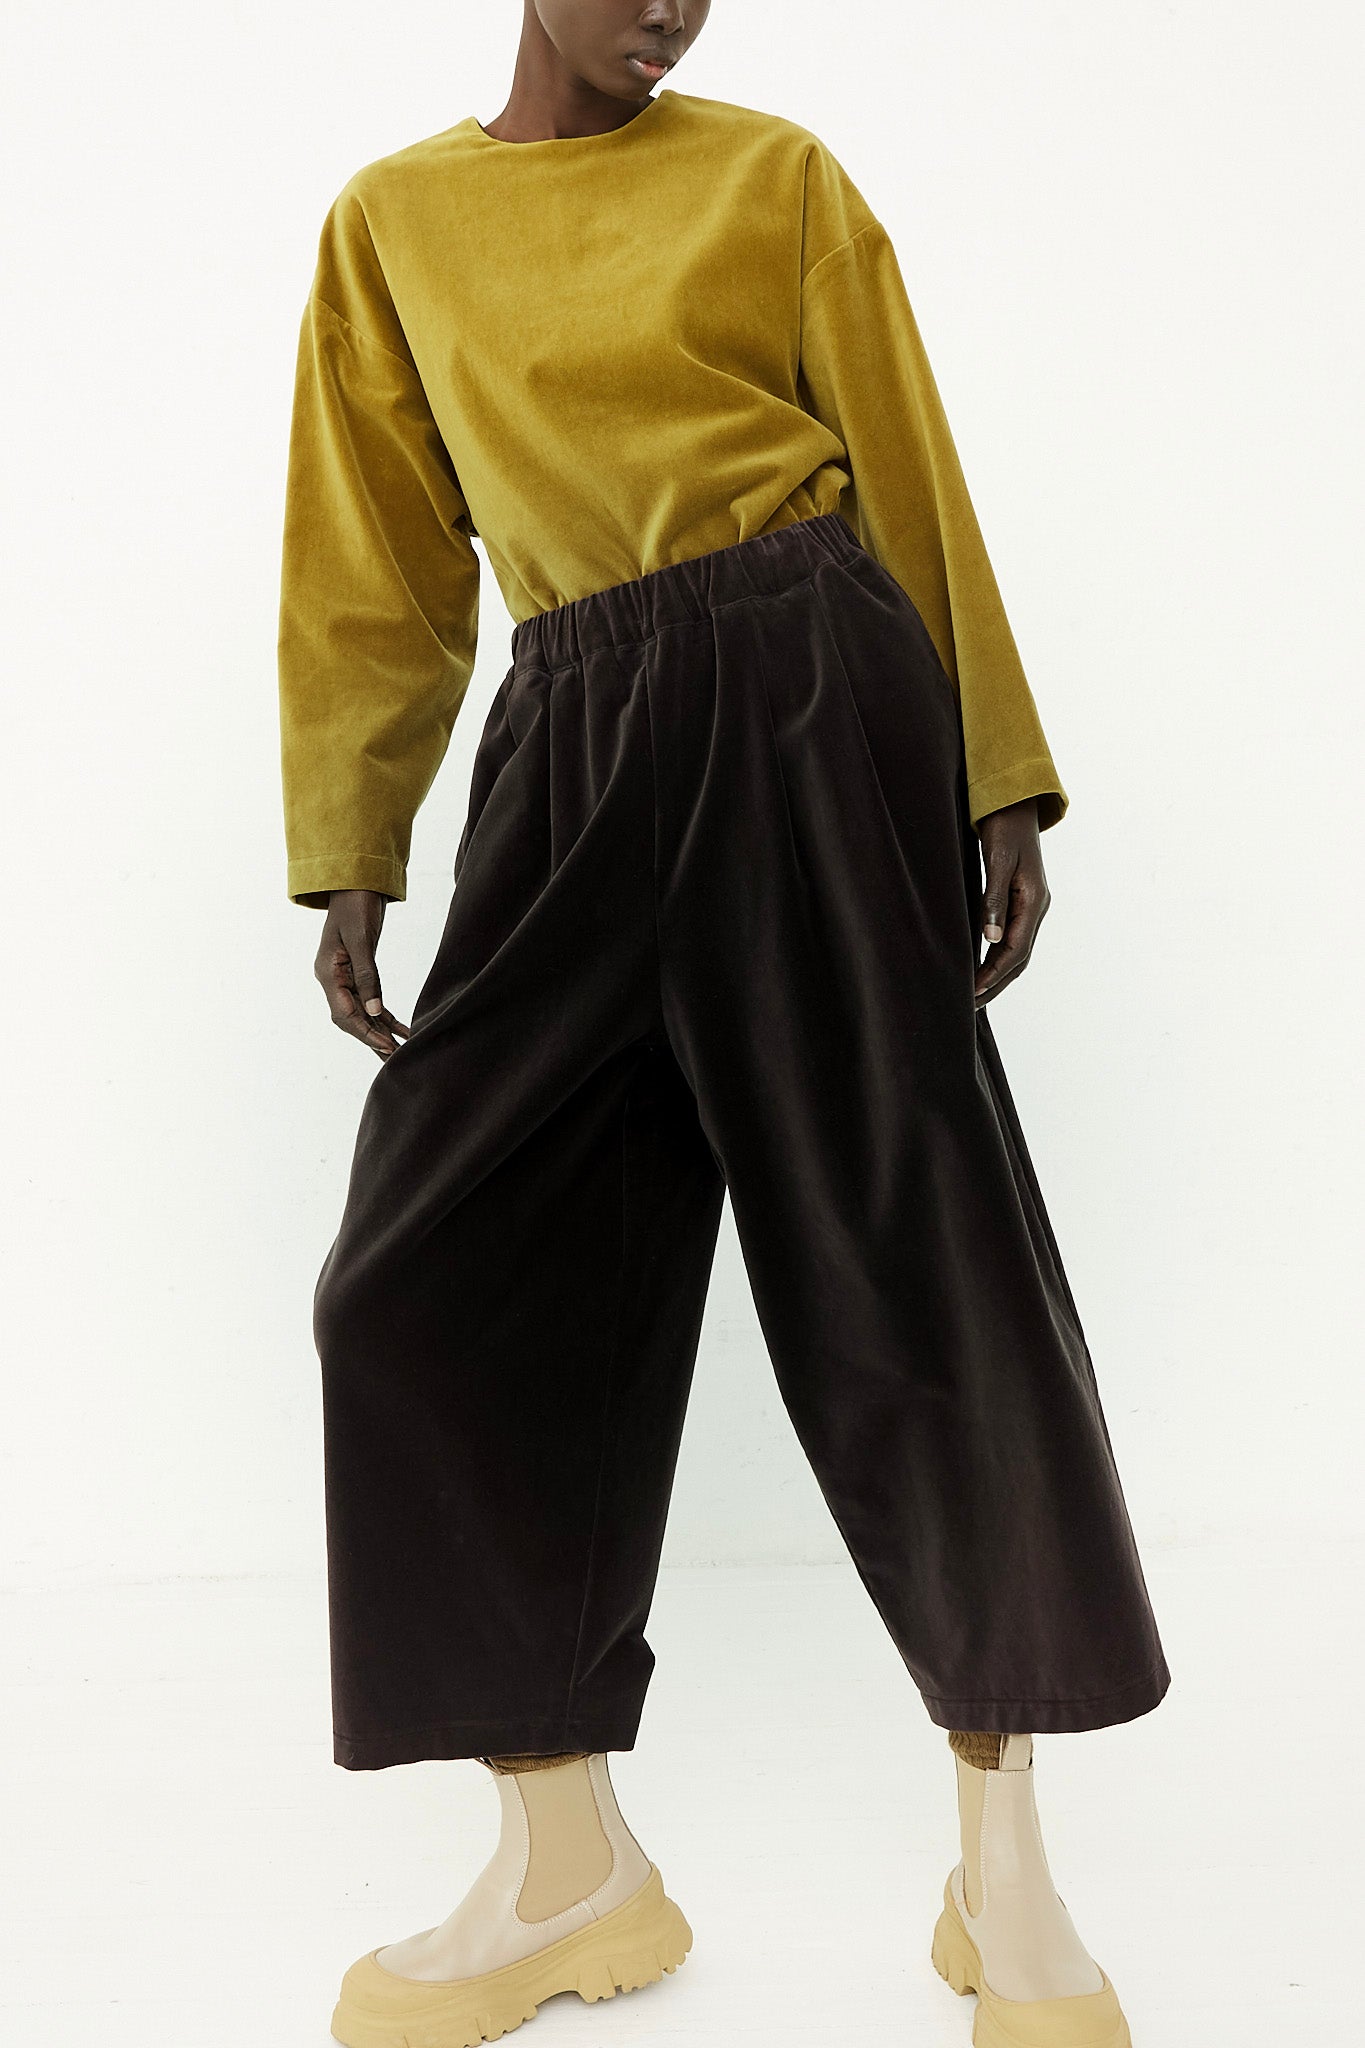 The model is wearing a yellow sweater and Cotton Velveteen Wide Pants with an elasticated waist by Black Crane.